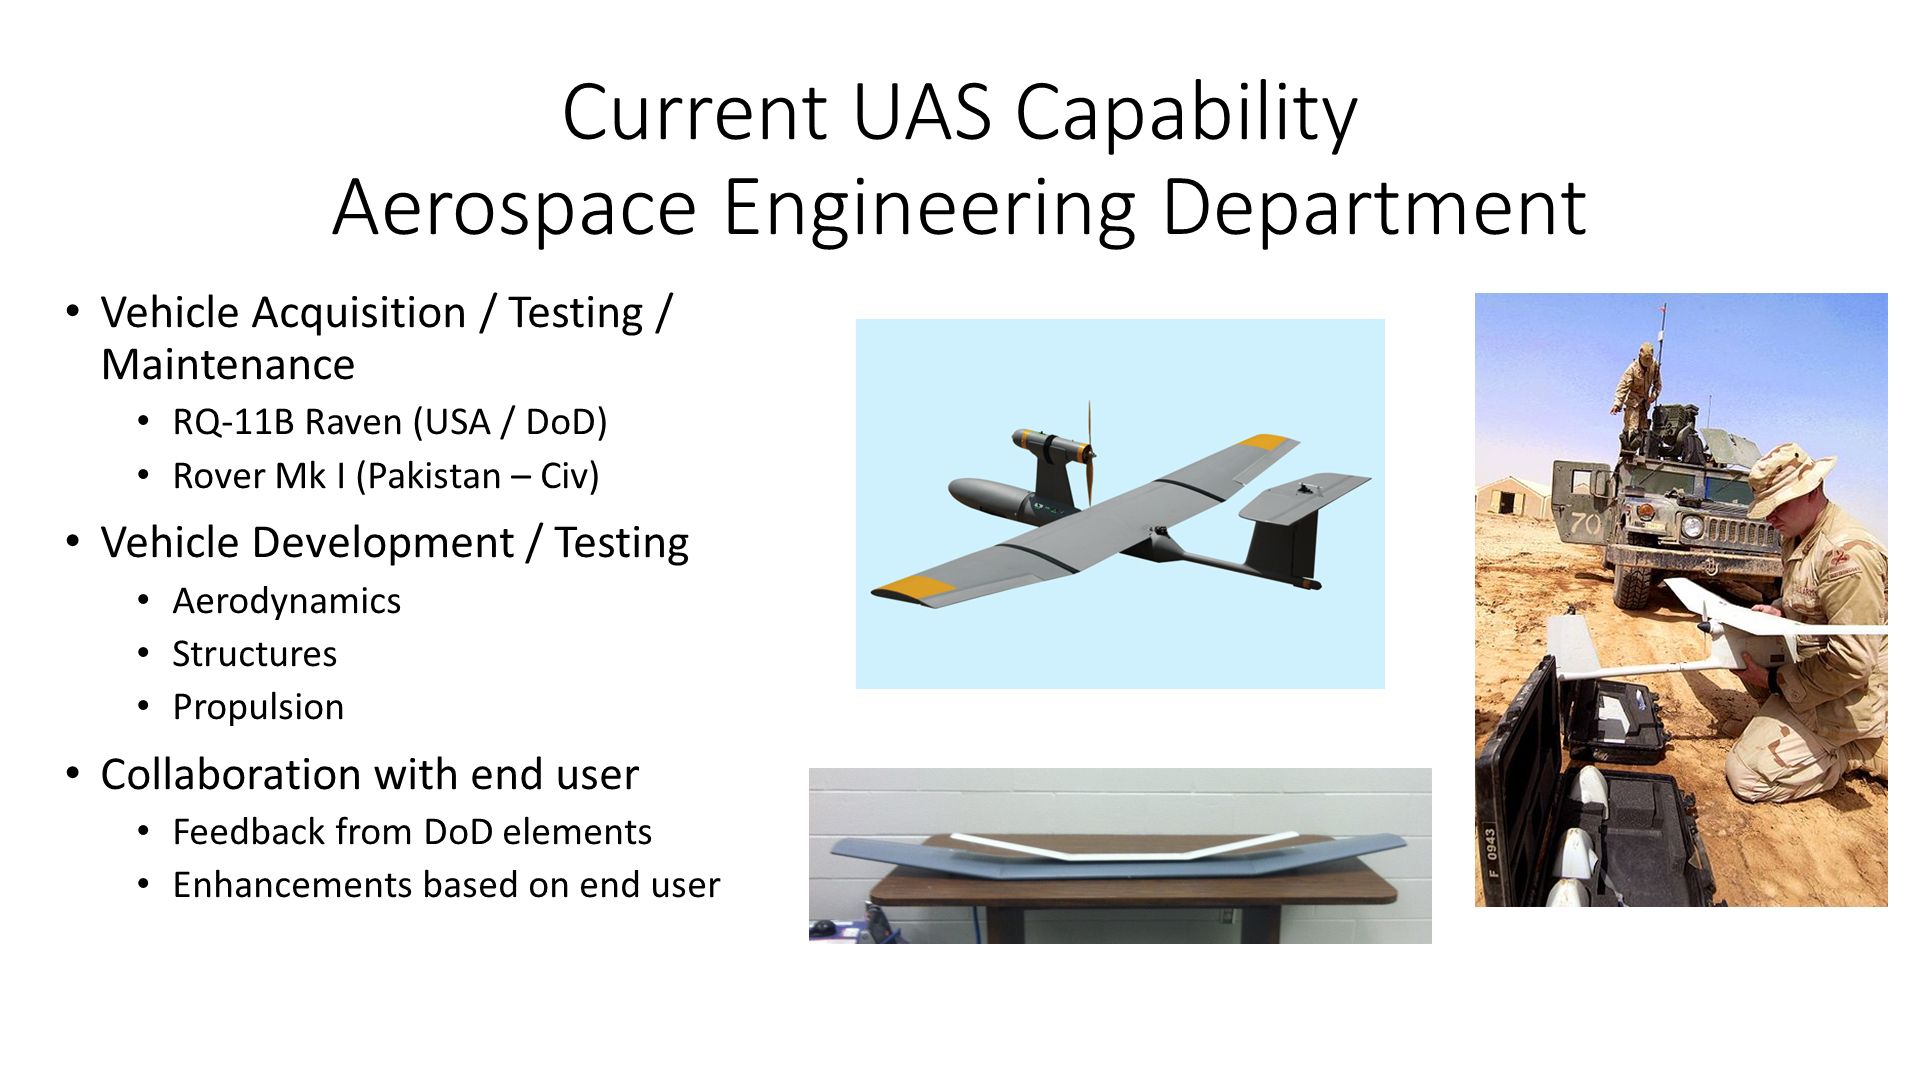 A slide showing current capabilities of the uas.